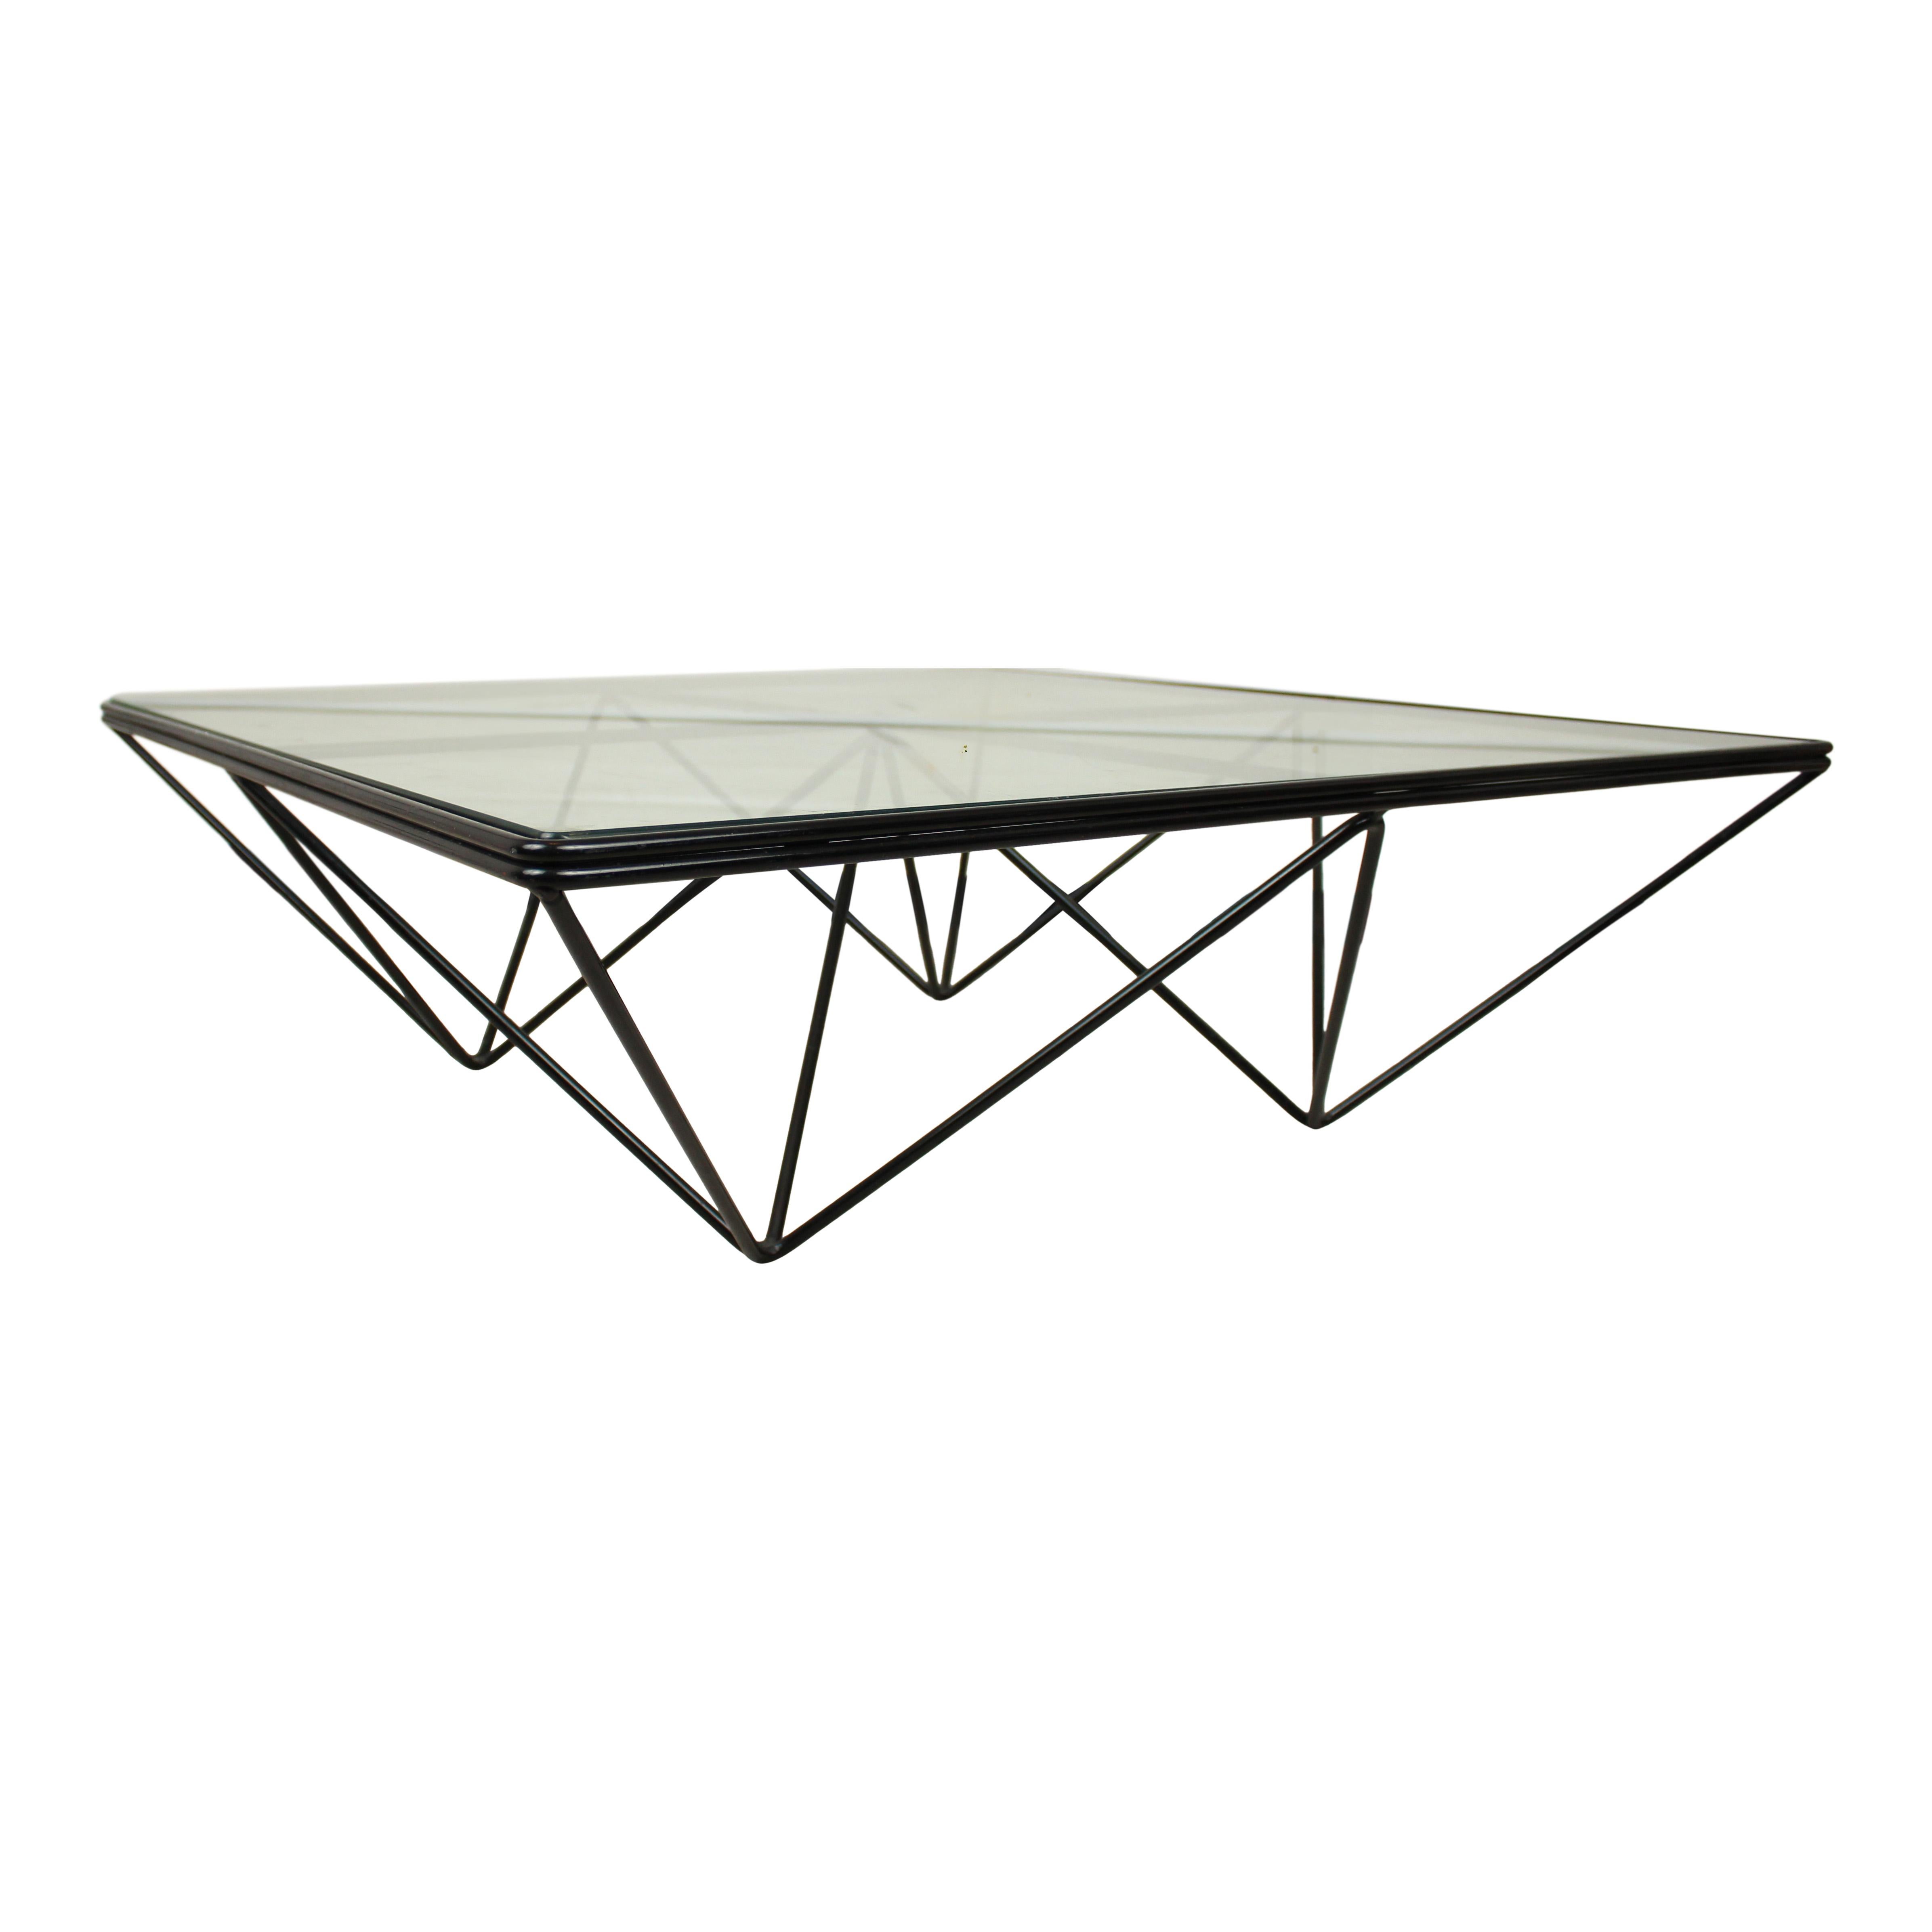 Industrial Italian Design Coffee Table in The Style of Alanda by Paolo Piva, 1980s